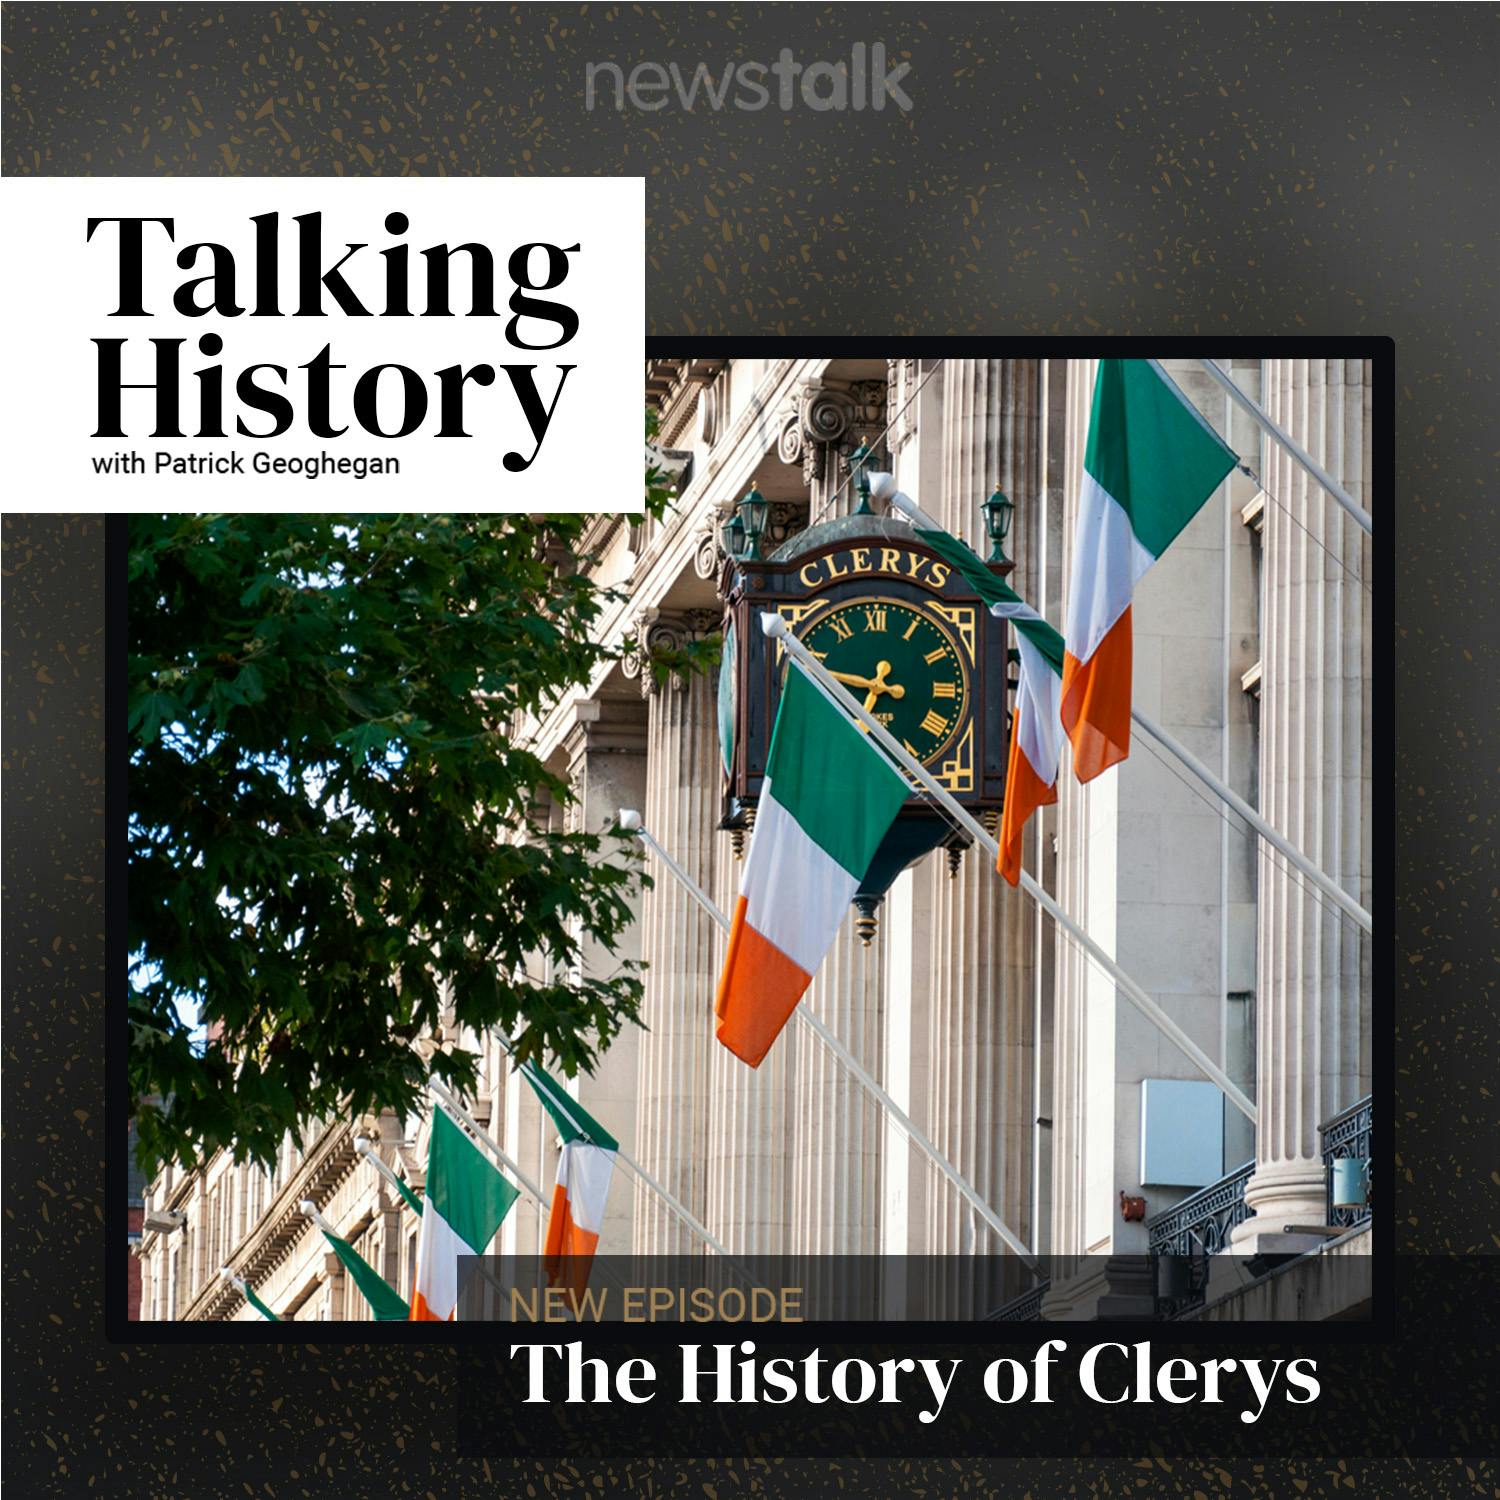 The History of Clerys